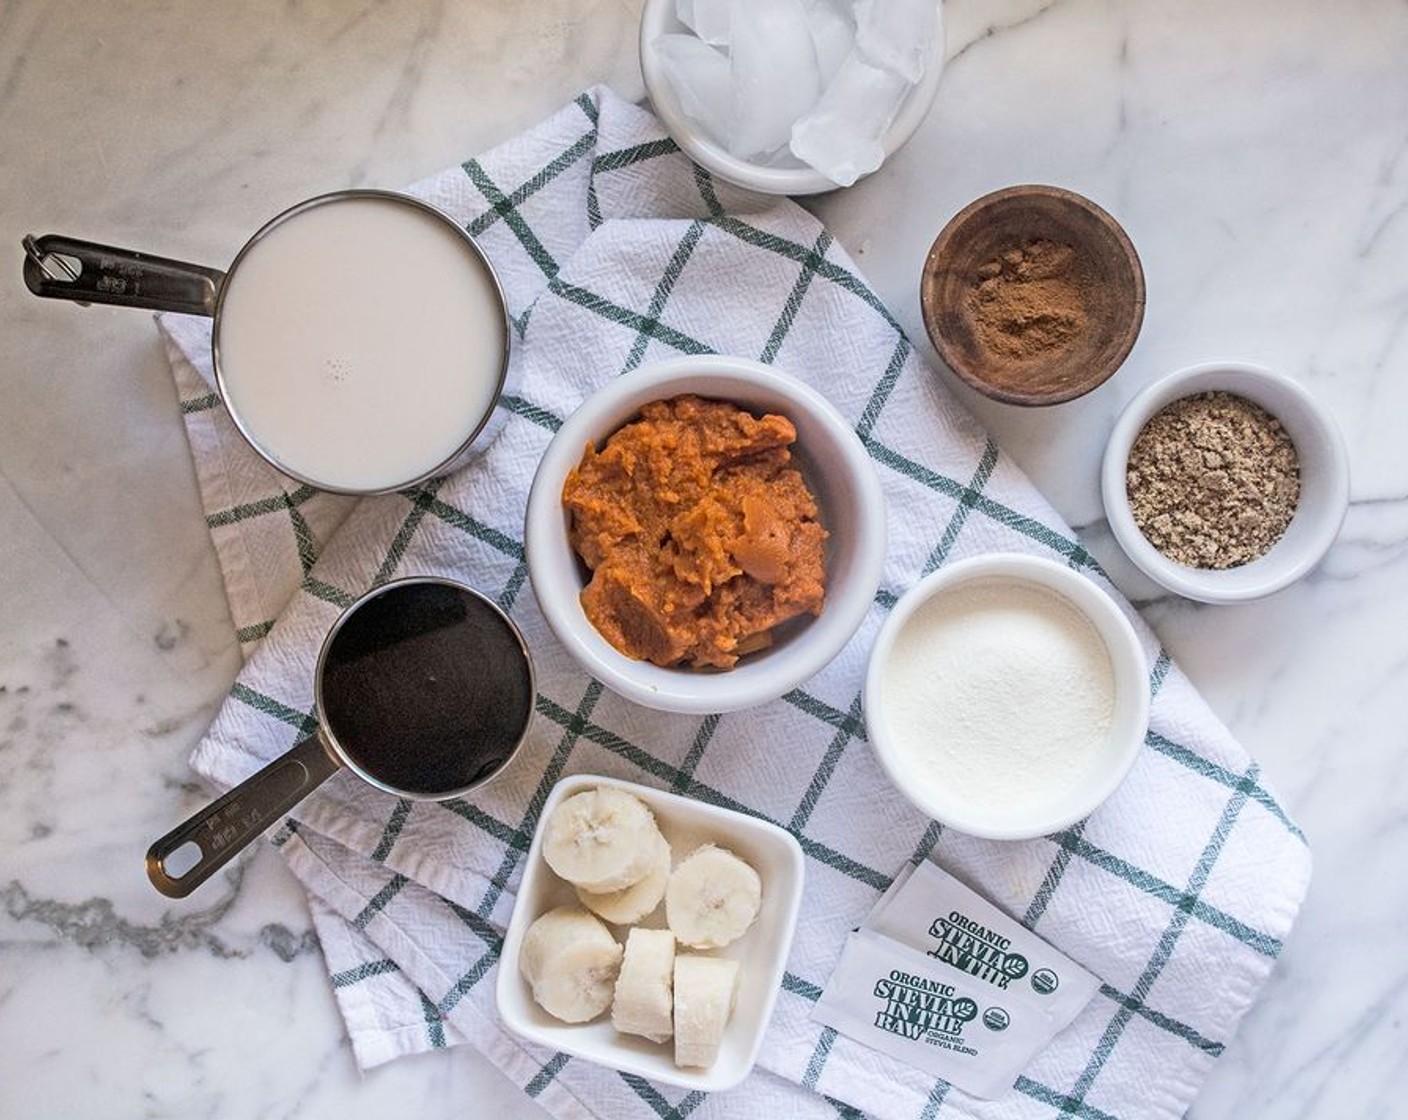 step 1 Add Unsweetened Vanilla Almond Milk (3/4 cup), Banana (1), 100% Pumpkin Purée (1/3 cup), Coffee (1/4 cup), Protein Powder (2 Tbsp), Ground Flaxseed (1 Tbsp), Ground Cinnamon (1 tsp), Pumpkin Pie Spice (1/2 tsp), Stevia (2 packets) and Ice (1 handful) to high power blender, blend until smooth.